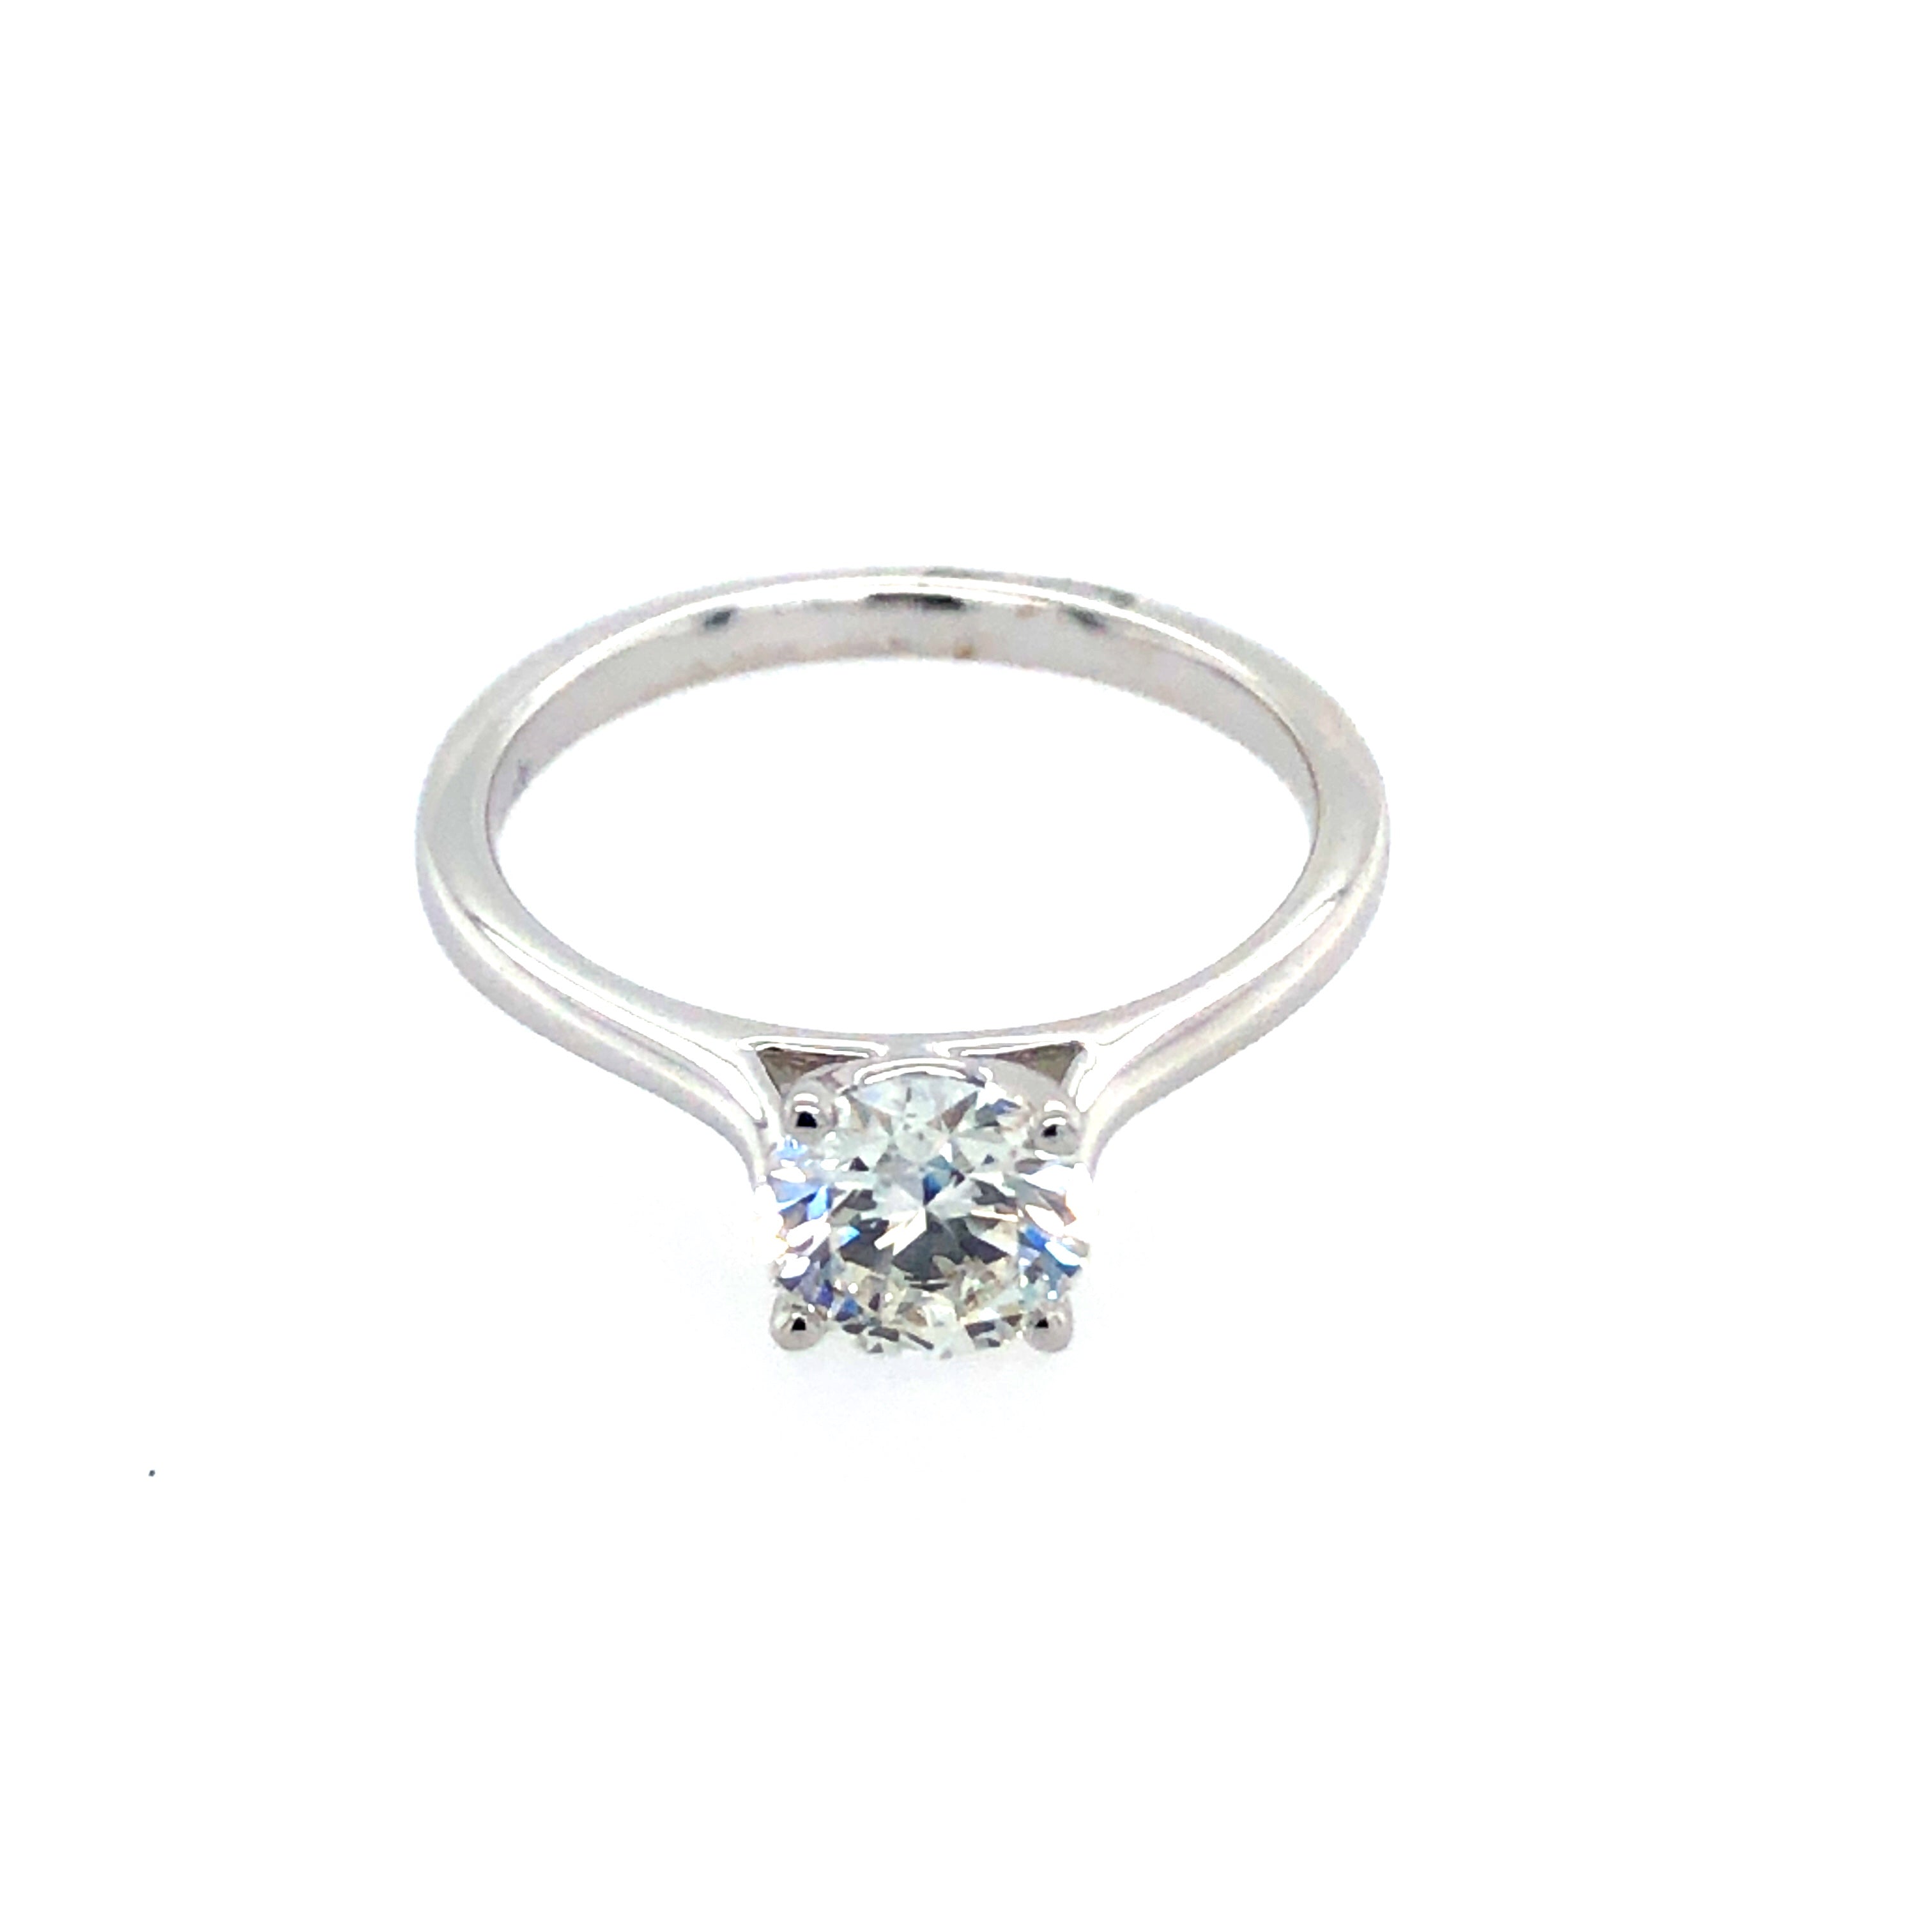 Solitaire New Born Engagement Ring - Diamond Engagement Rings - New Born Created